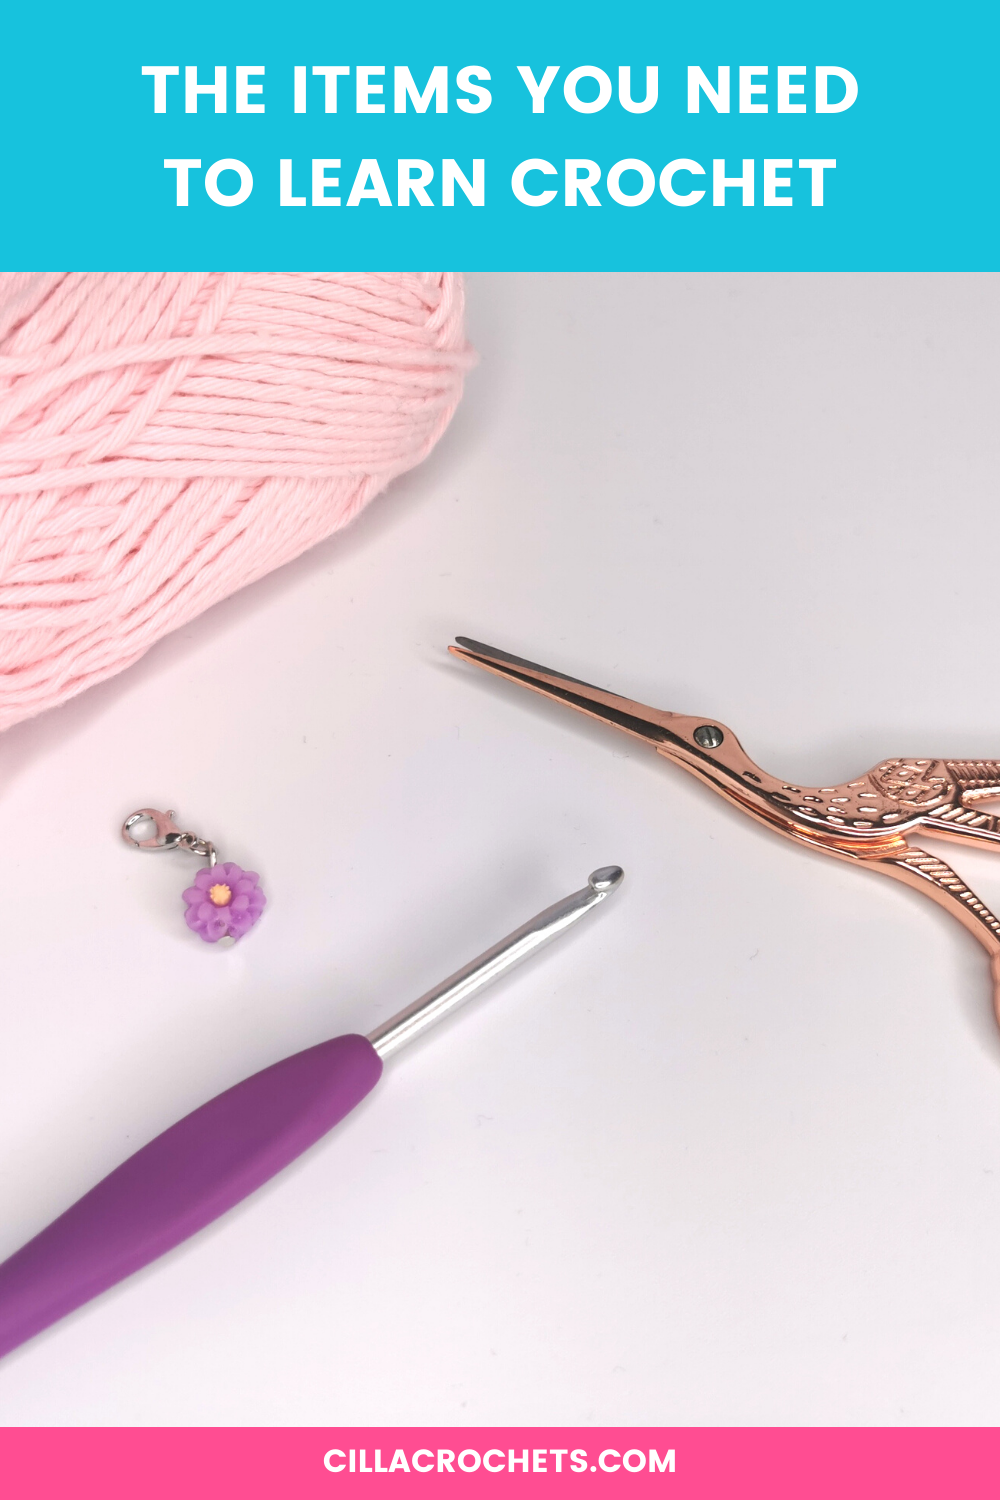 Discover the 10 Must-Have Knitting and Crochet Tools That Will